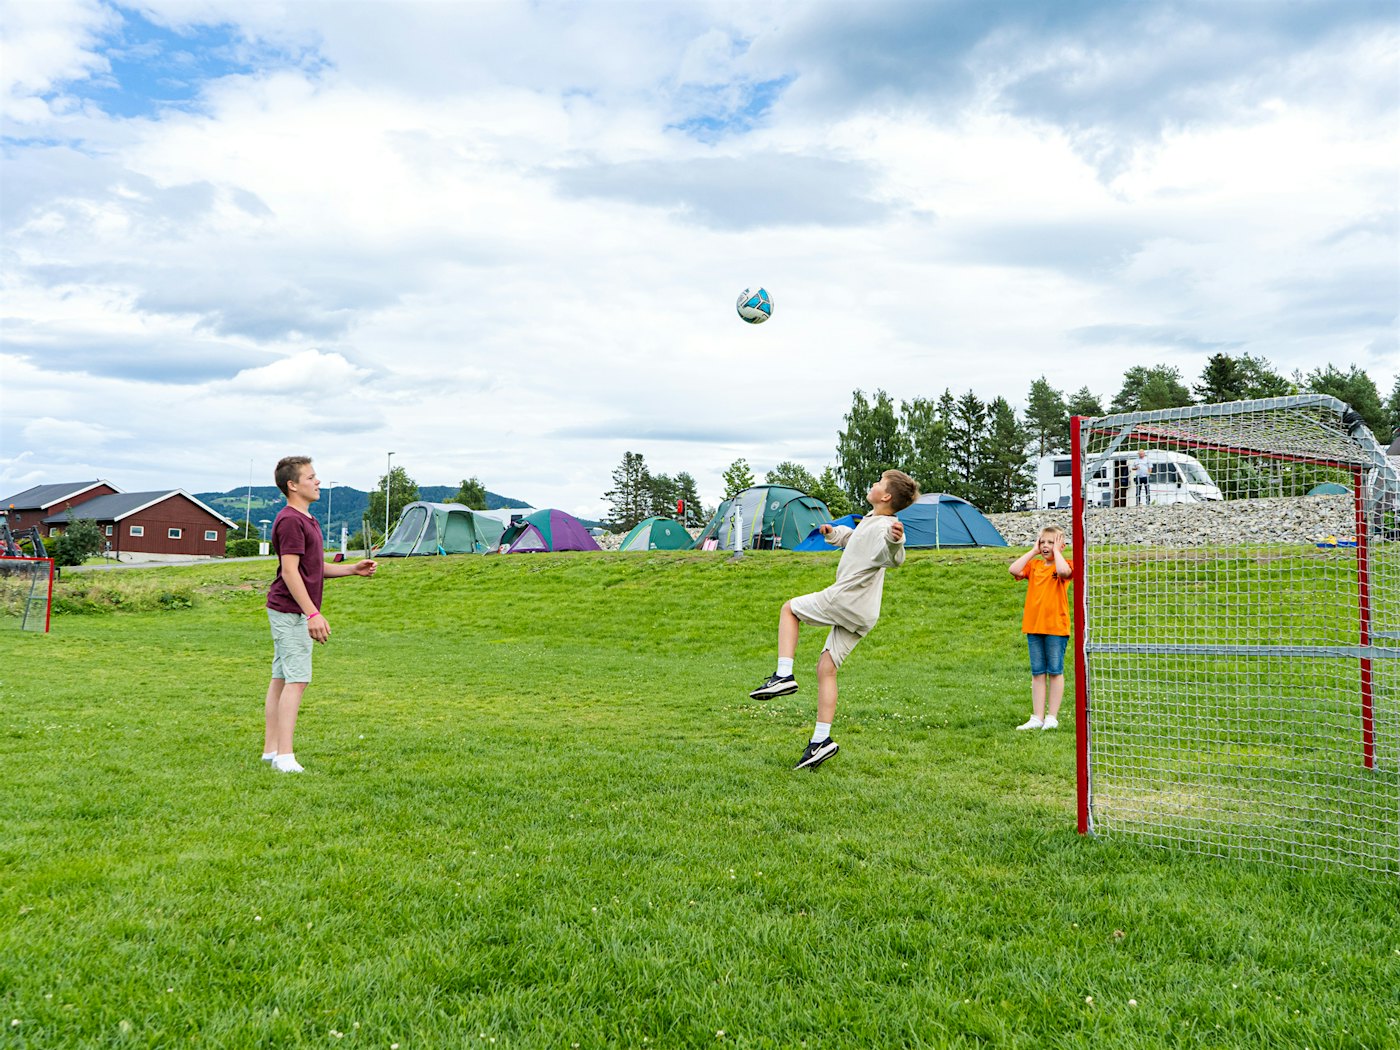 Three boys play football on a football pitch, tent in the background. Photo